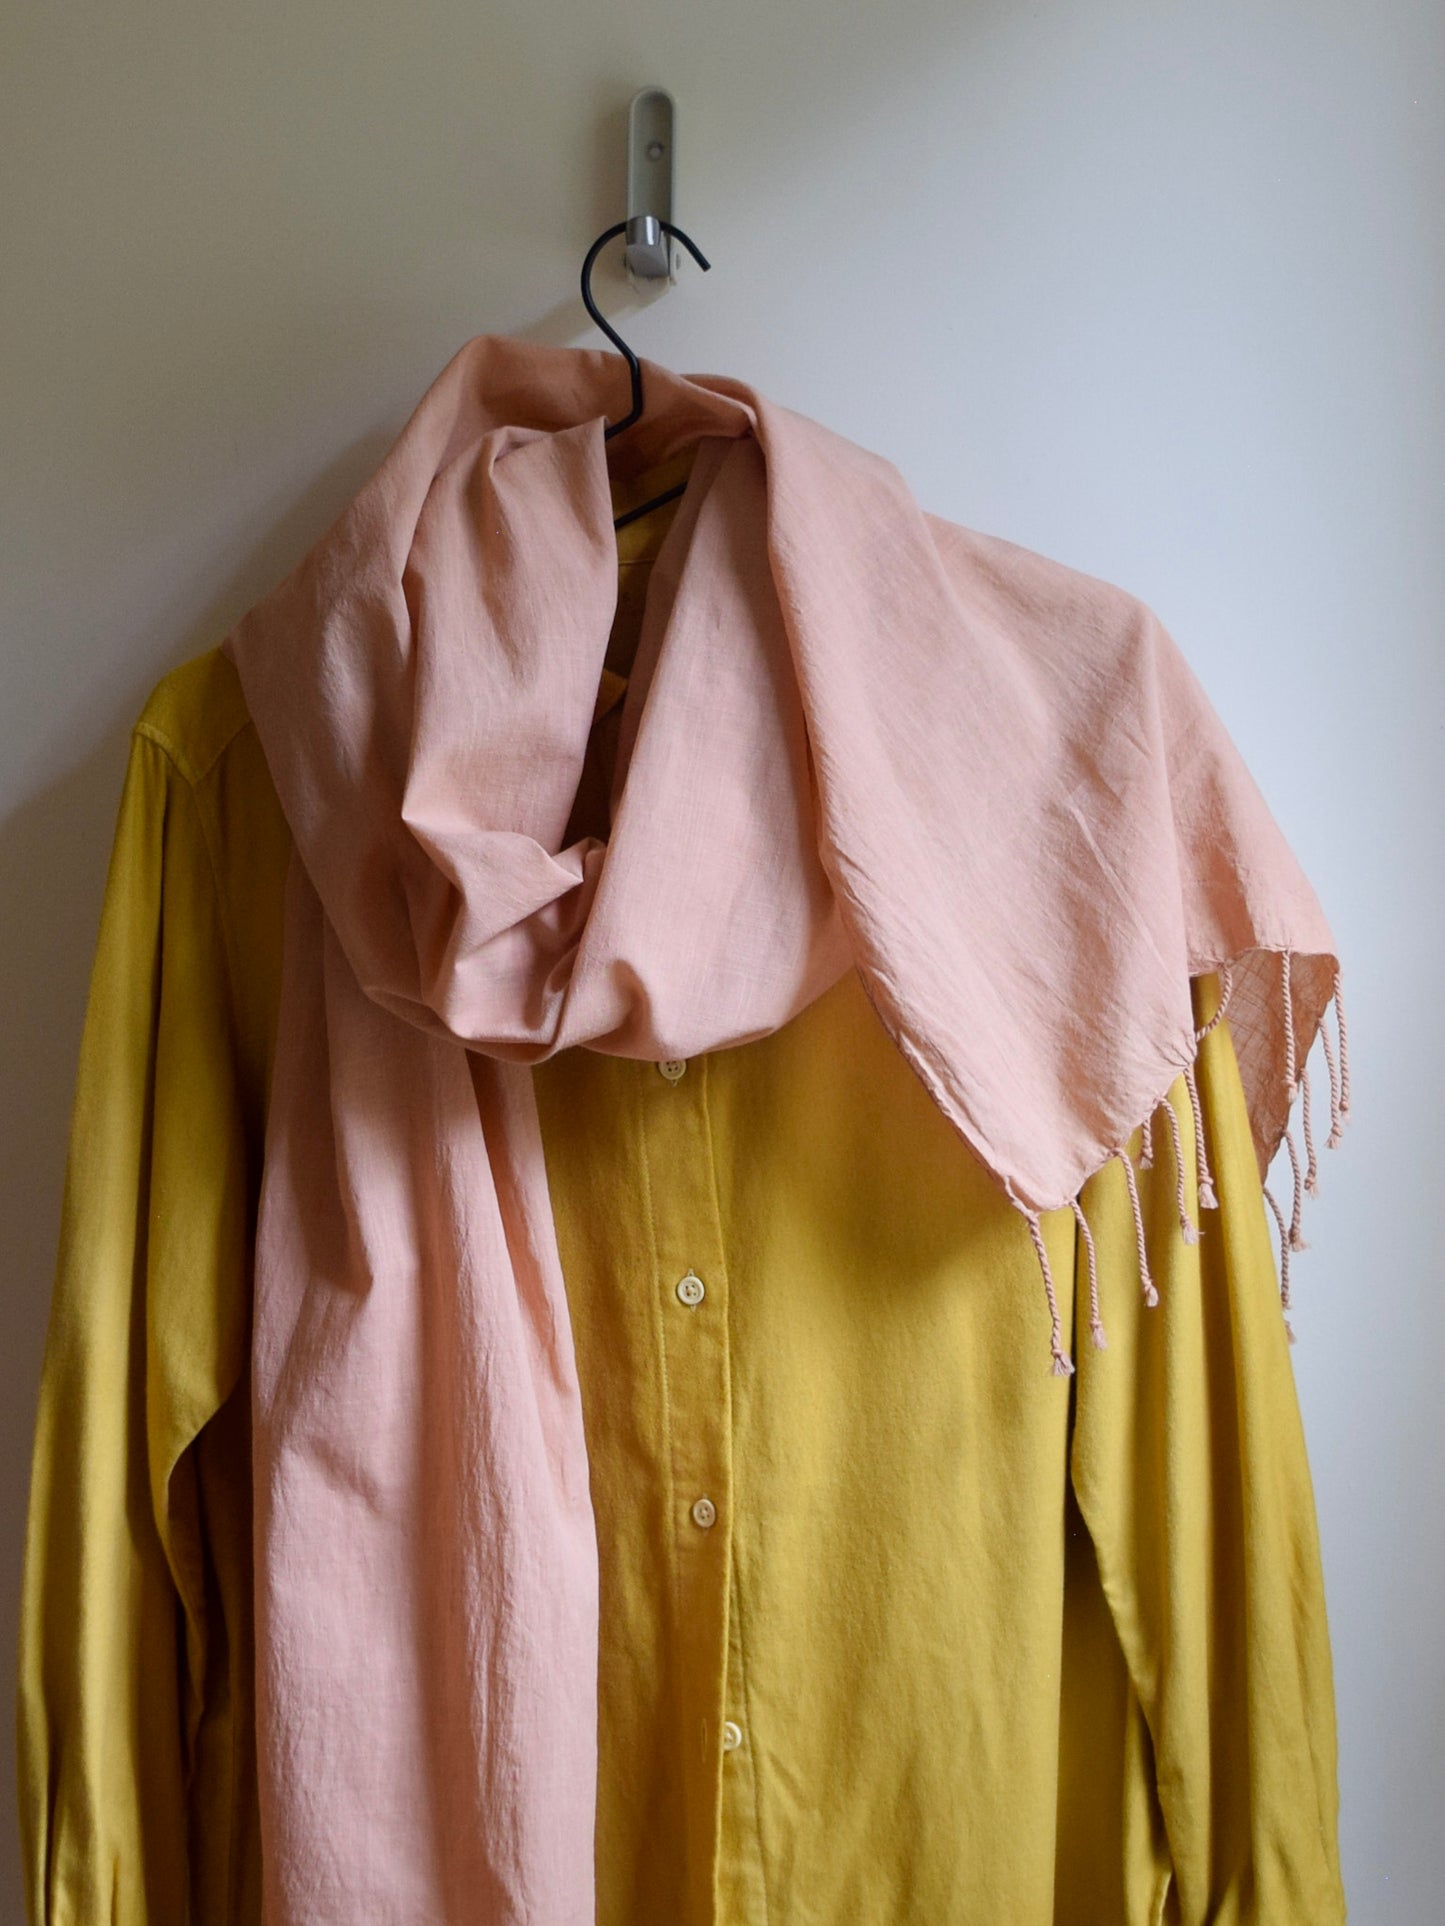 Marigold, Natural-dyed Organic Flannel Tunic Shirt